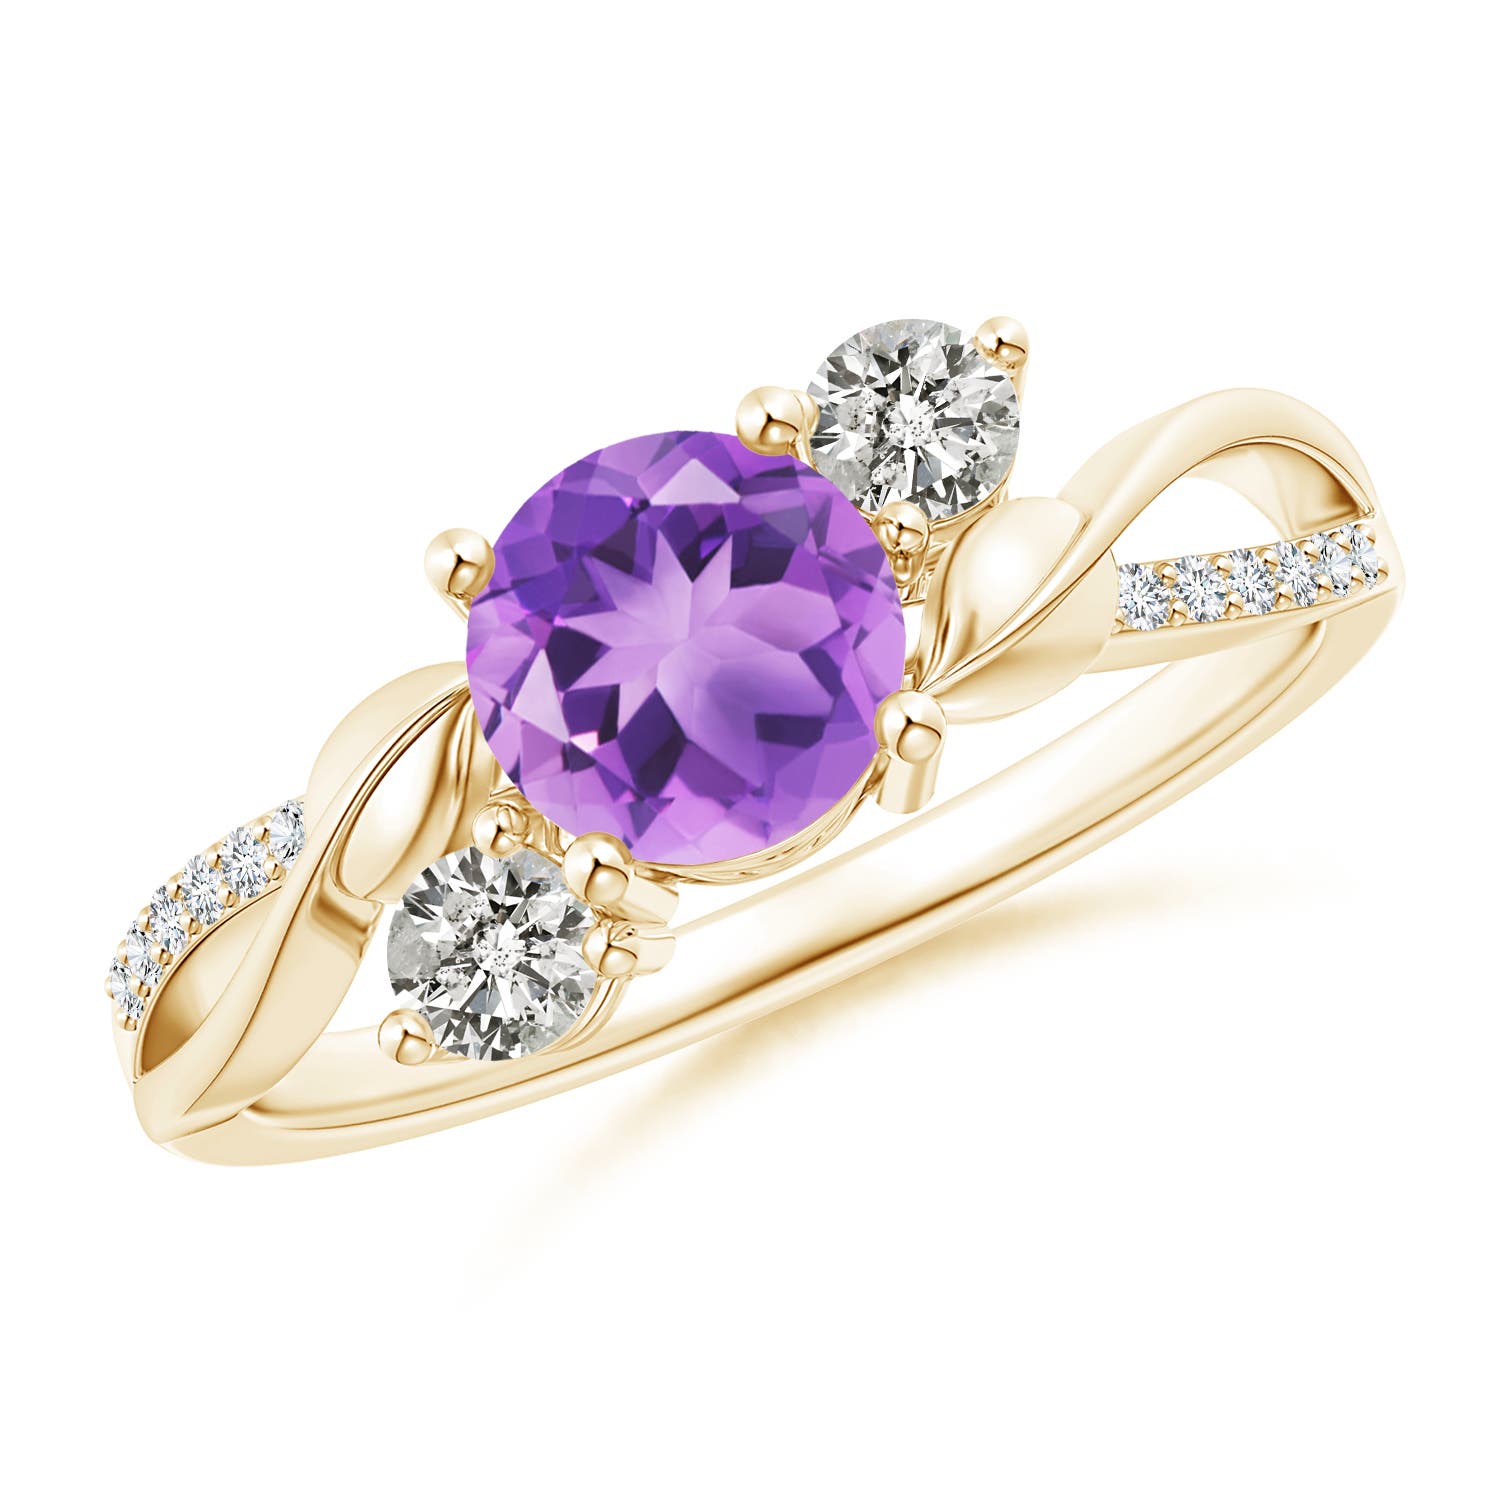 A - Amethyst / 1.07 CT / 14 KT Yellow Gold